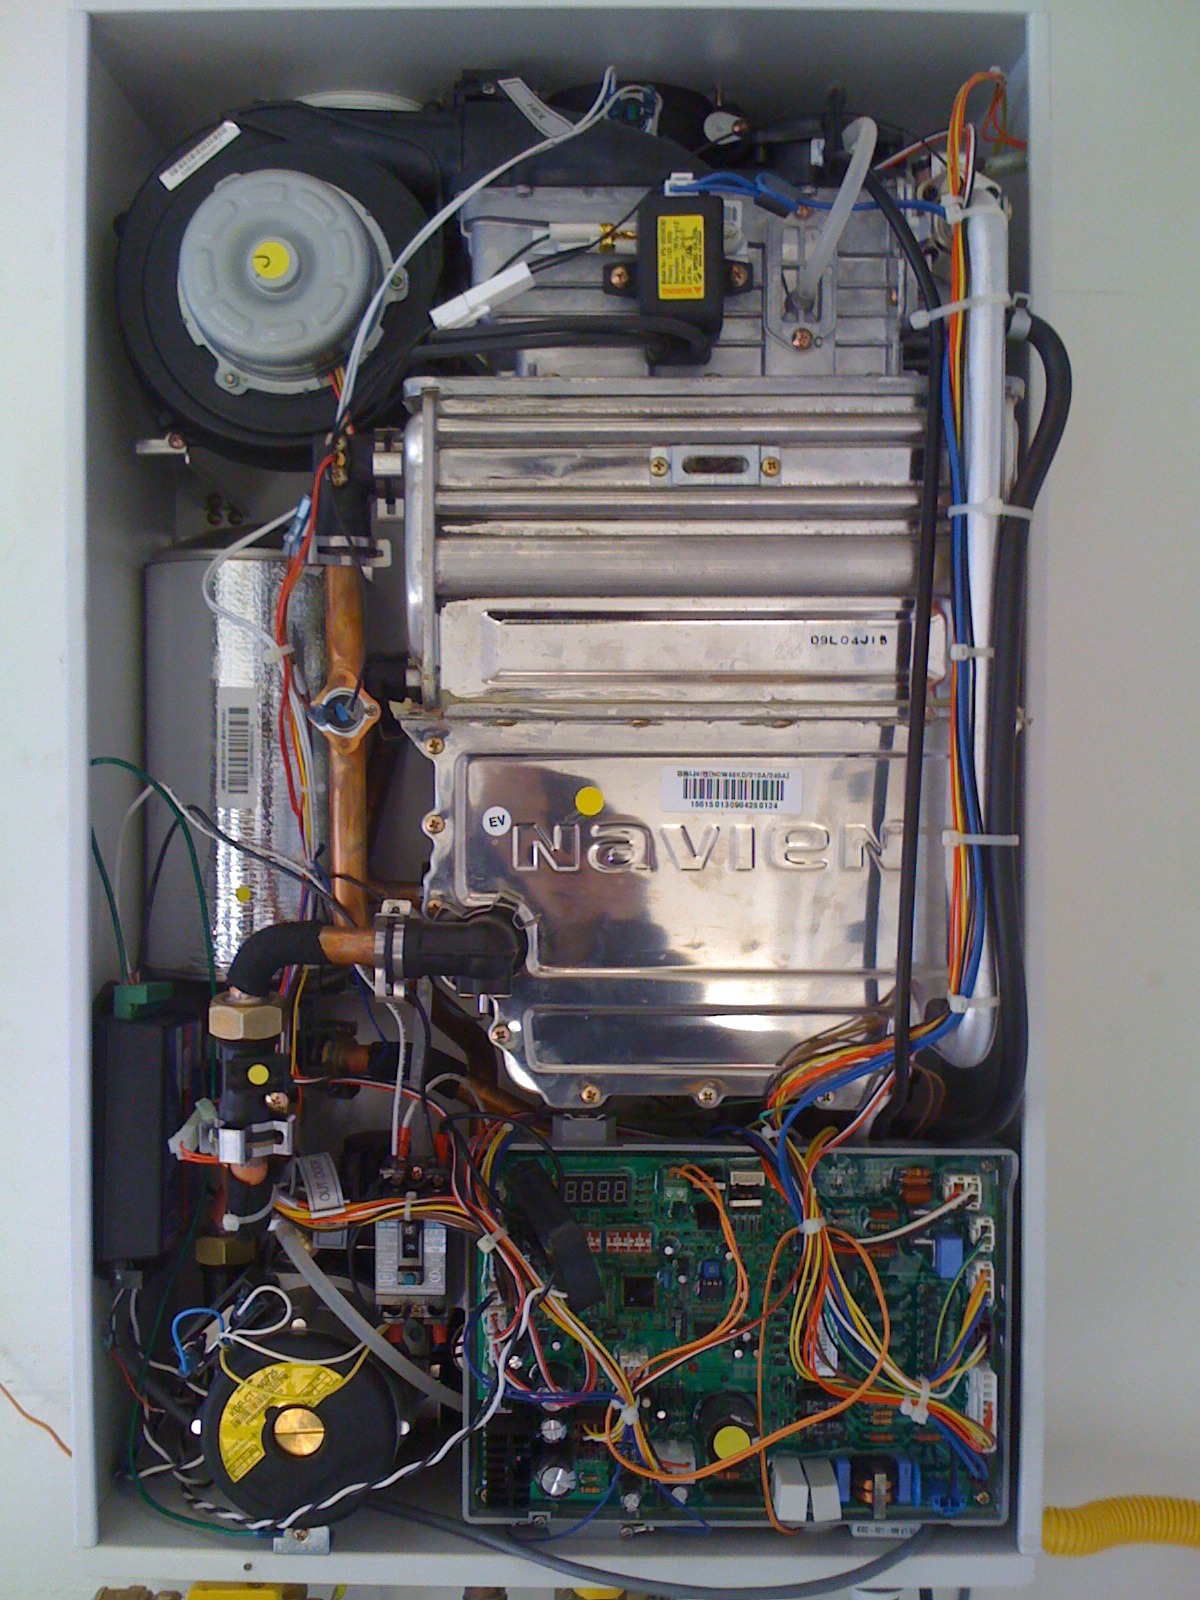 Tankless Water Heater Wiring Diagram from www.myfloridahomeenergy.com